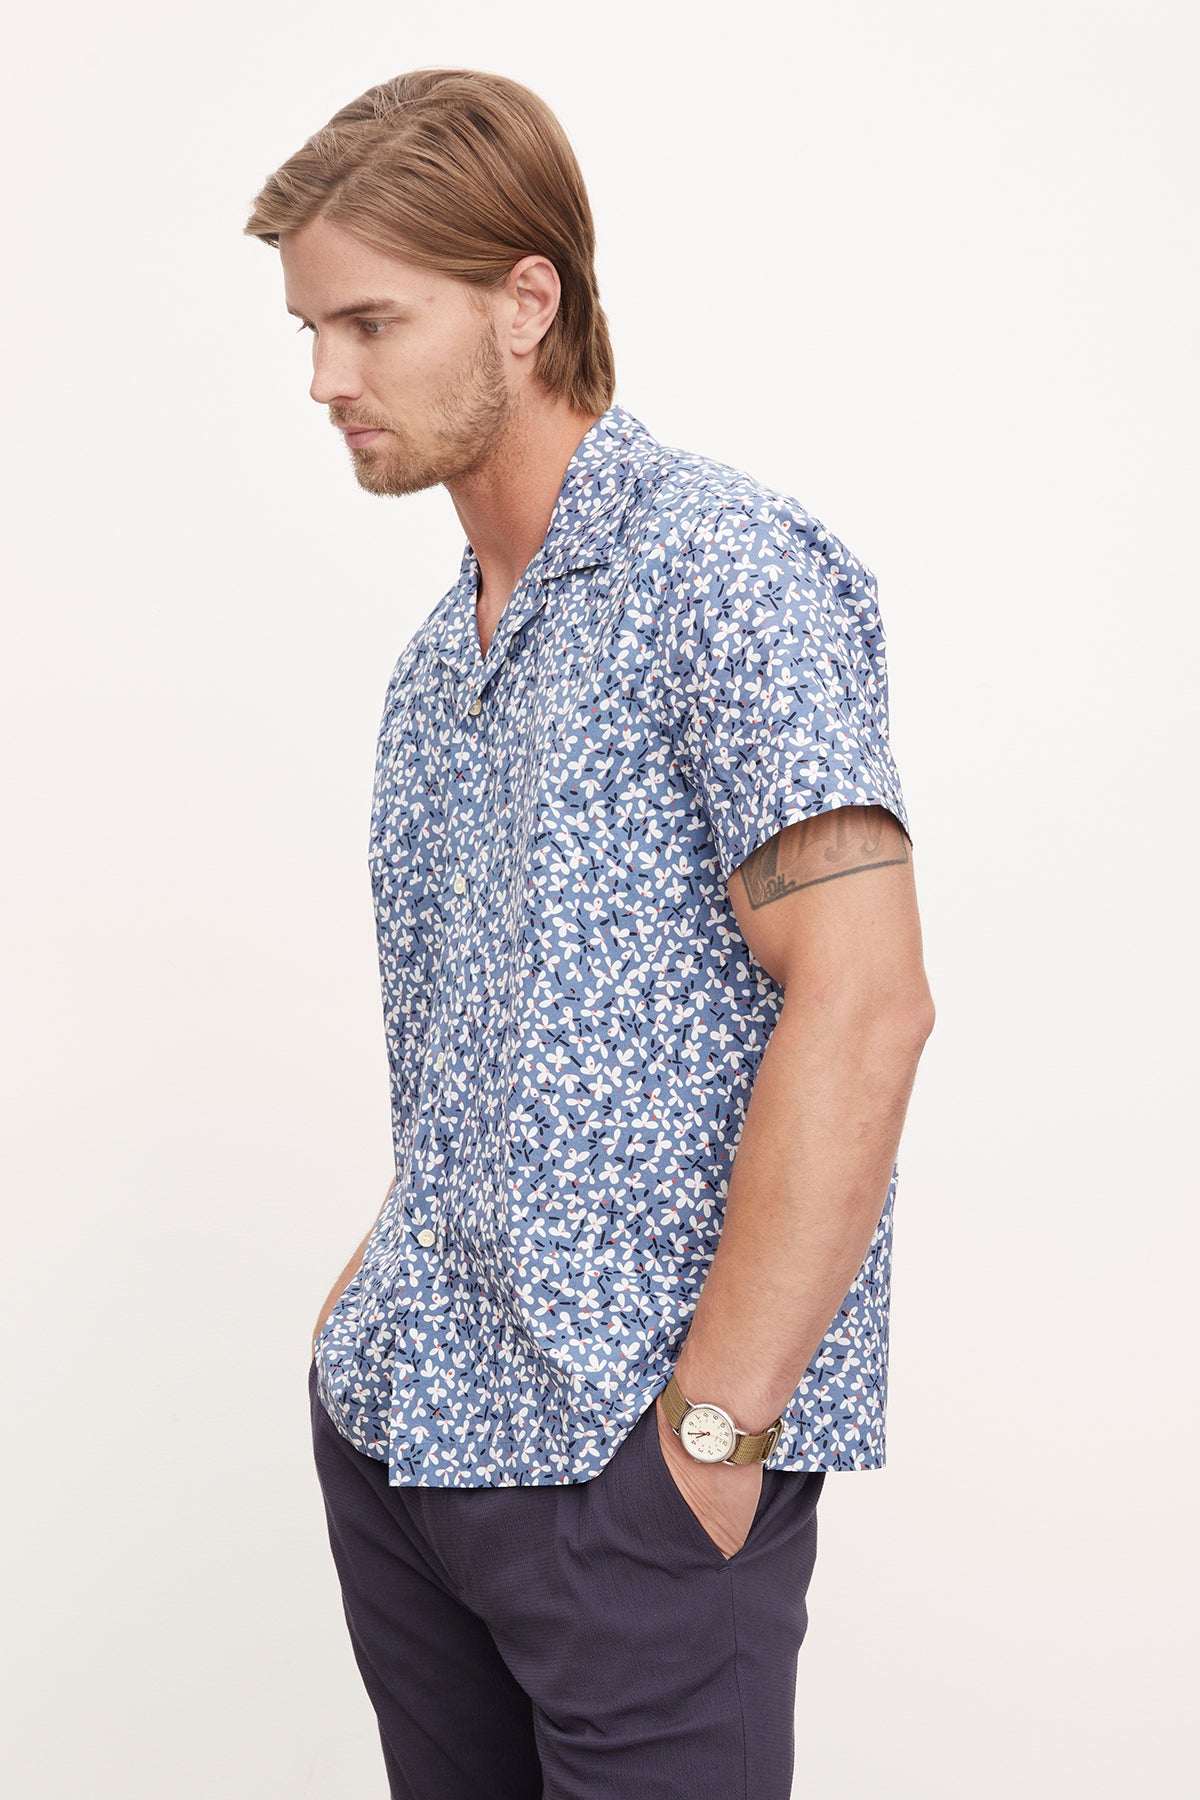 Man in a blue and white floral print Iggy button-up shirt by Velvet by Graham & Spencer and navy trousers, standing sideways, looking to the left with a watch on his wrist.-36918584836289